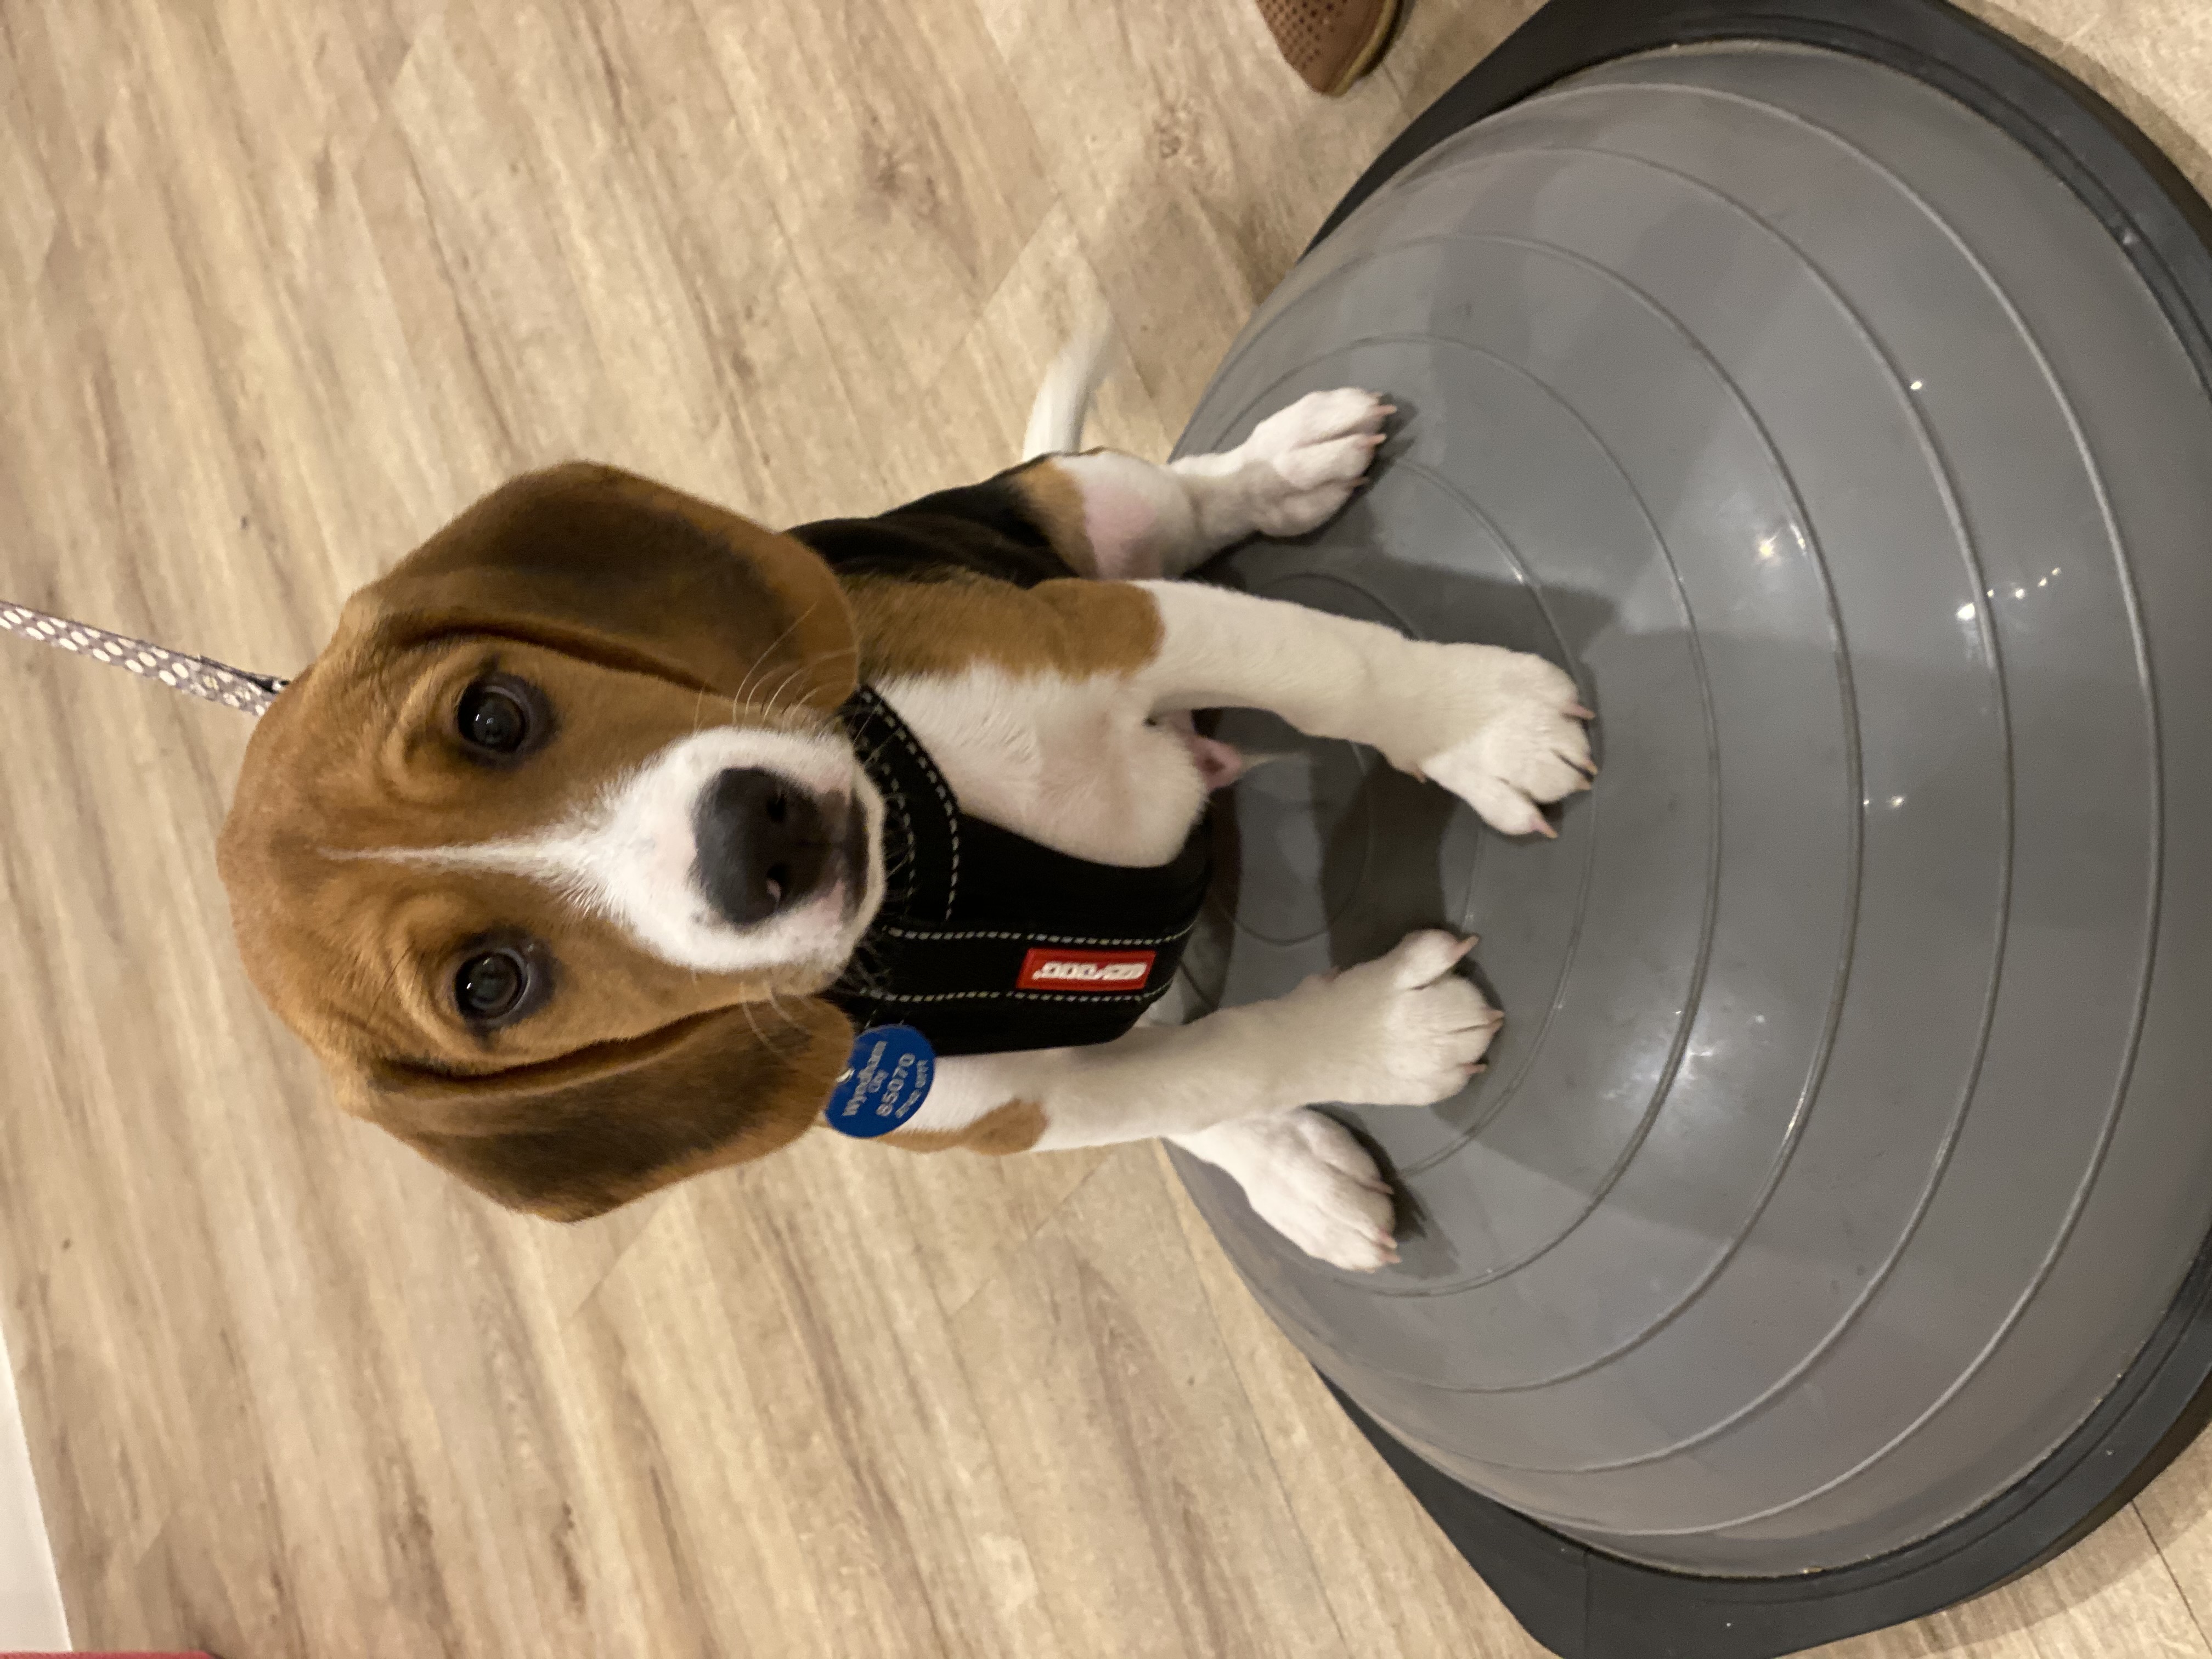 Puppy Training Classes - From A Dog's View